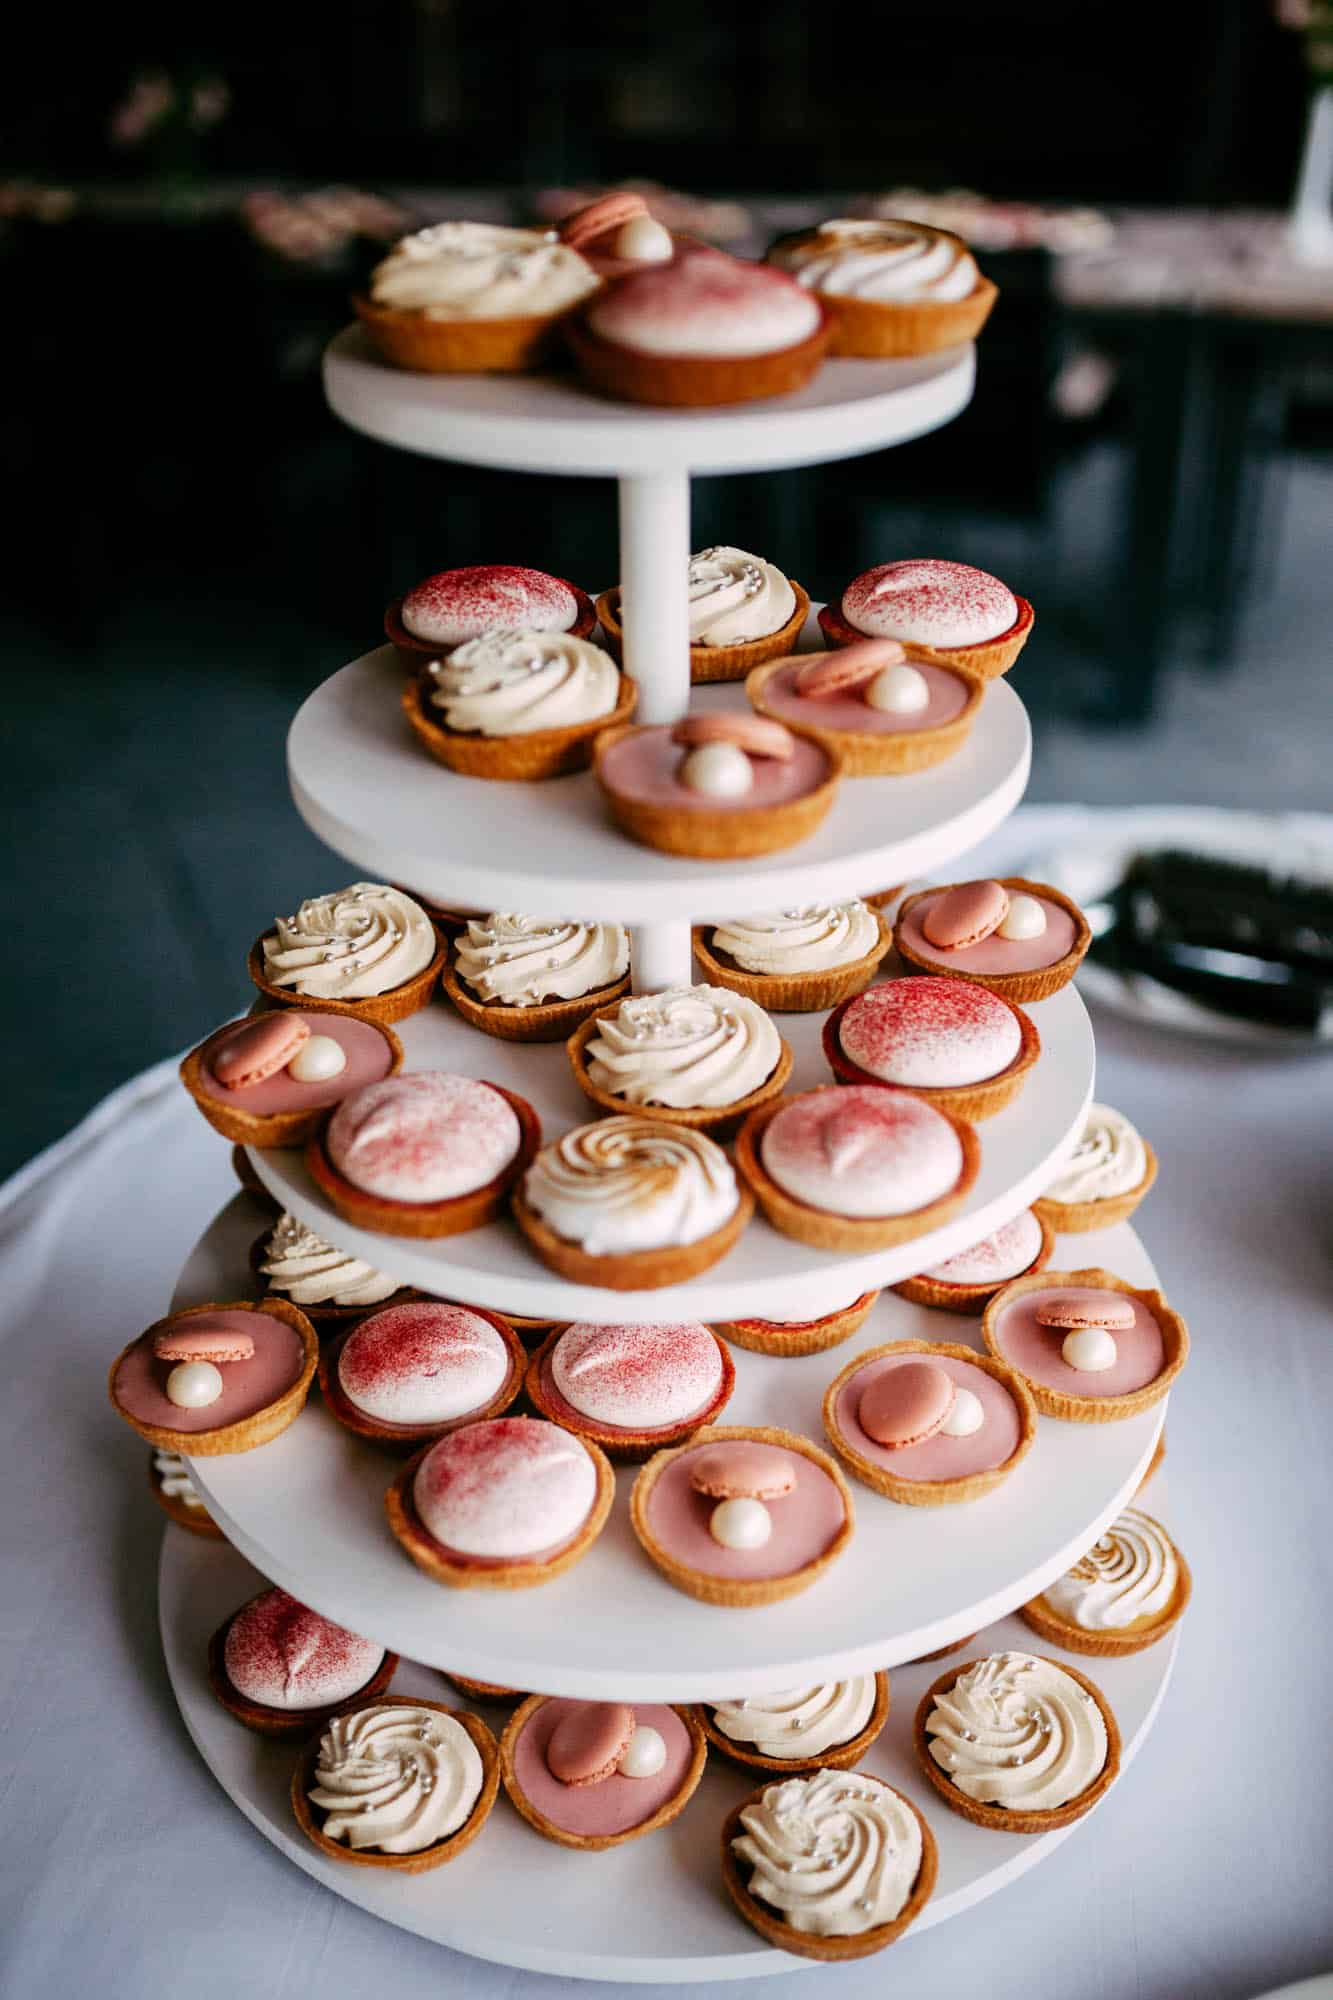 A three-tiered cake tray with wedding cakes on top.